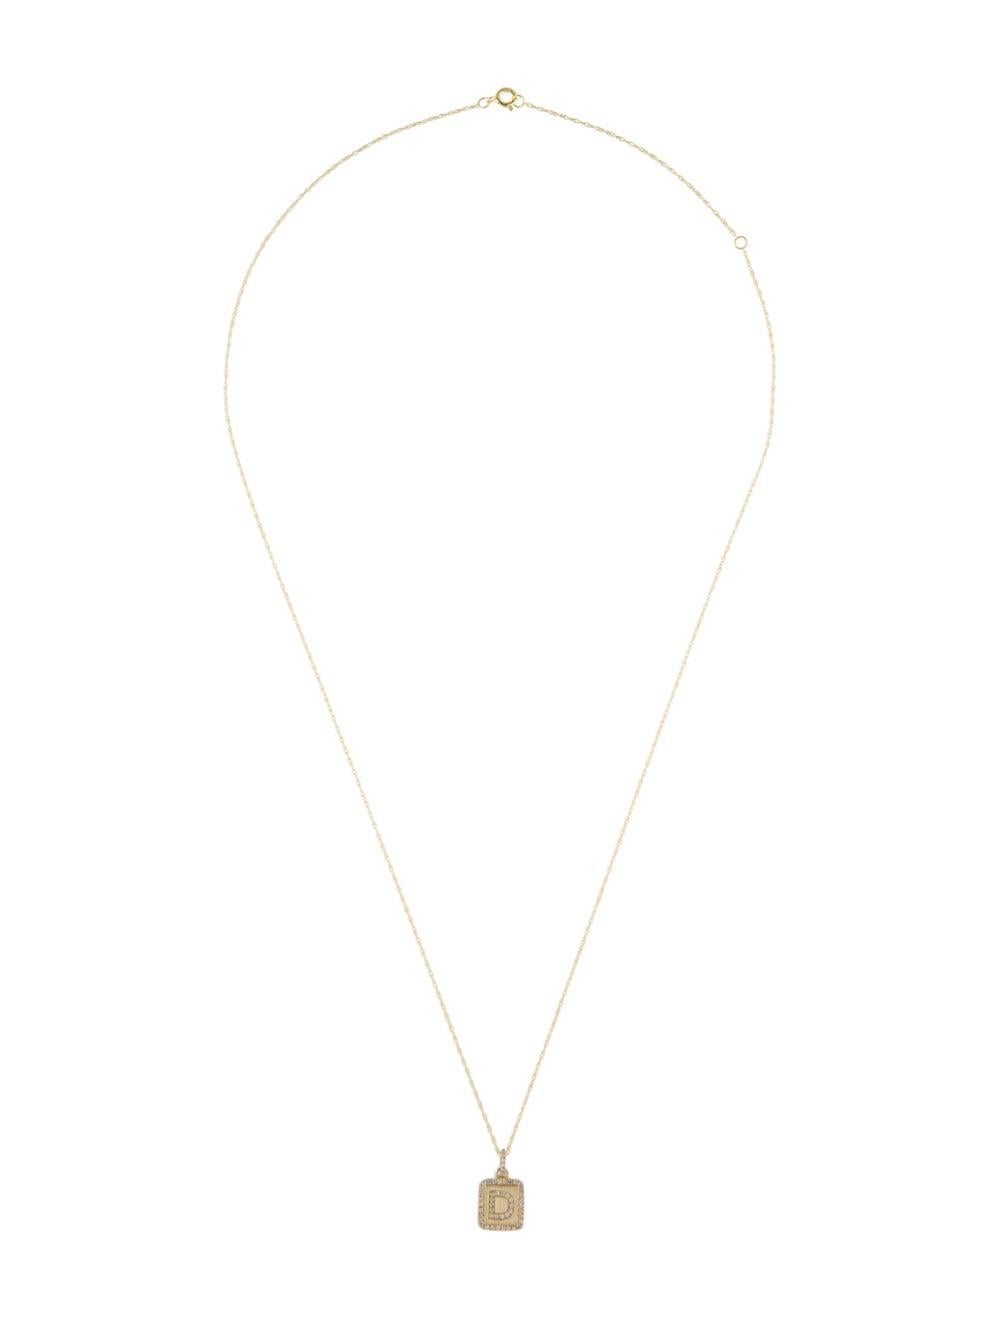 This is an adorable Dainty Initial Necklace crafted of 14k Gold with approximately 0.12 ct.- 0.15 ct. of Round Sparkly Diamonds depending on the initial. Diamond Color and Clarity GH-SI1-SI2. Comes on an 16-18